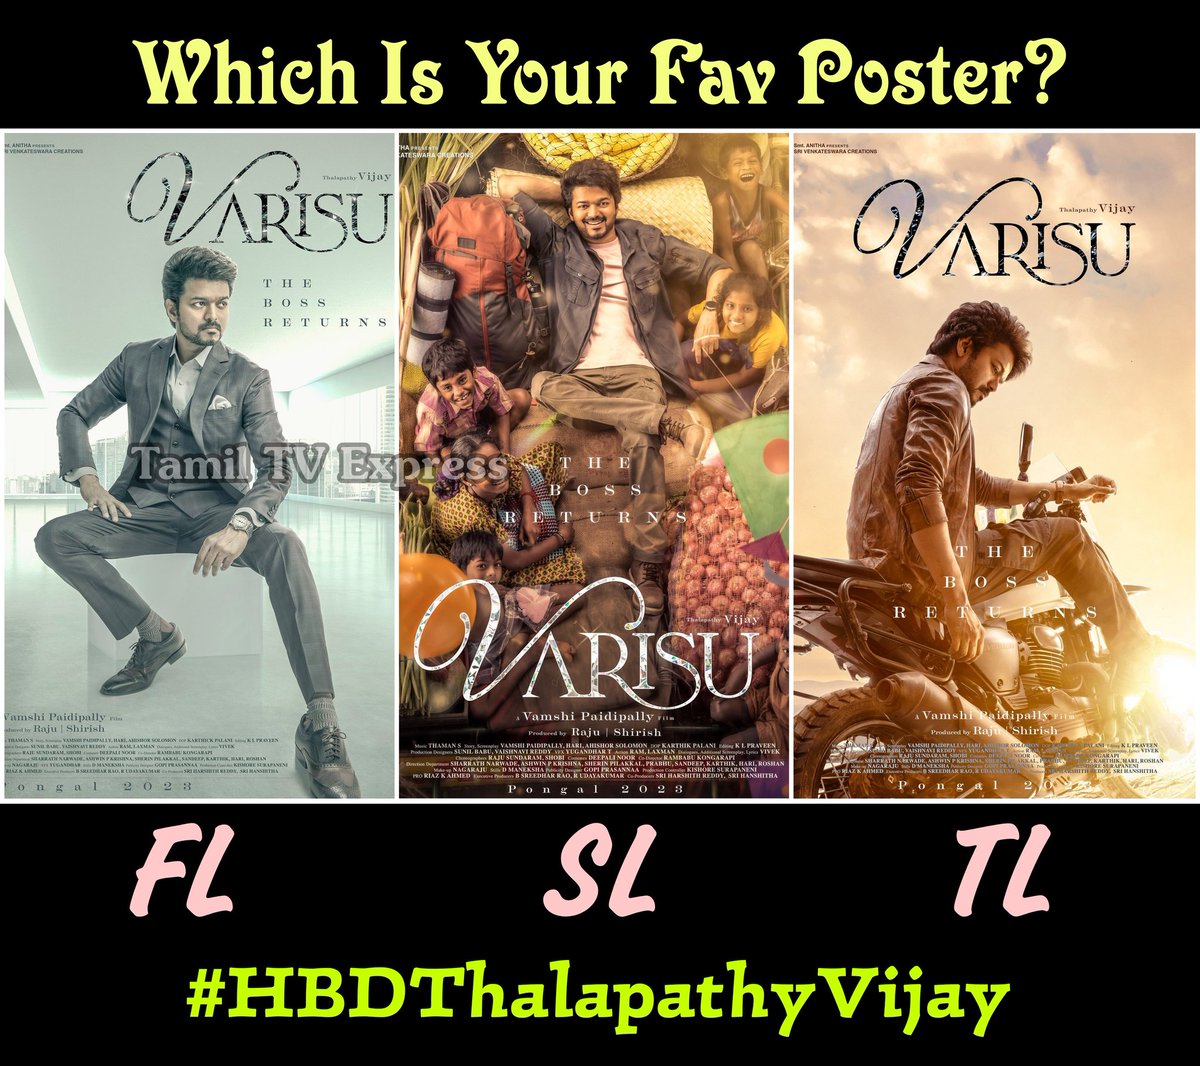 Which Is Your Favorite Poster? 
Comment Now

#HBDThalapathyVIJAY #VarisuFirstLook #VarisuSecondLook #VarisuThirdLook #ThalapathyVijay #Varisu #Thalapathy #ThalapathyVijay